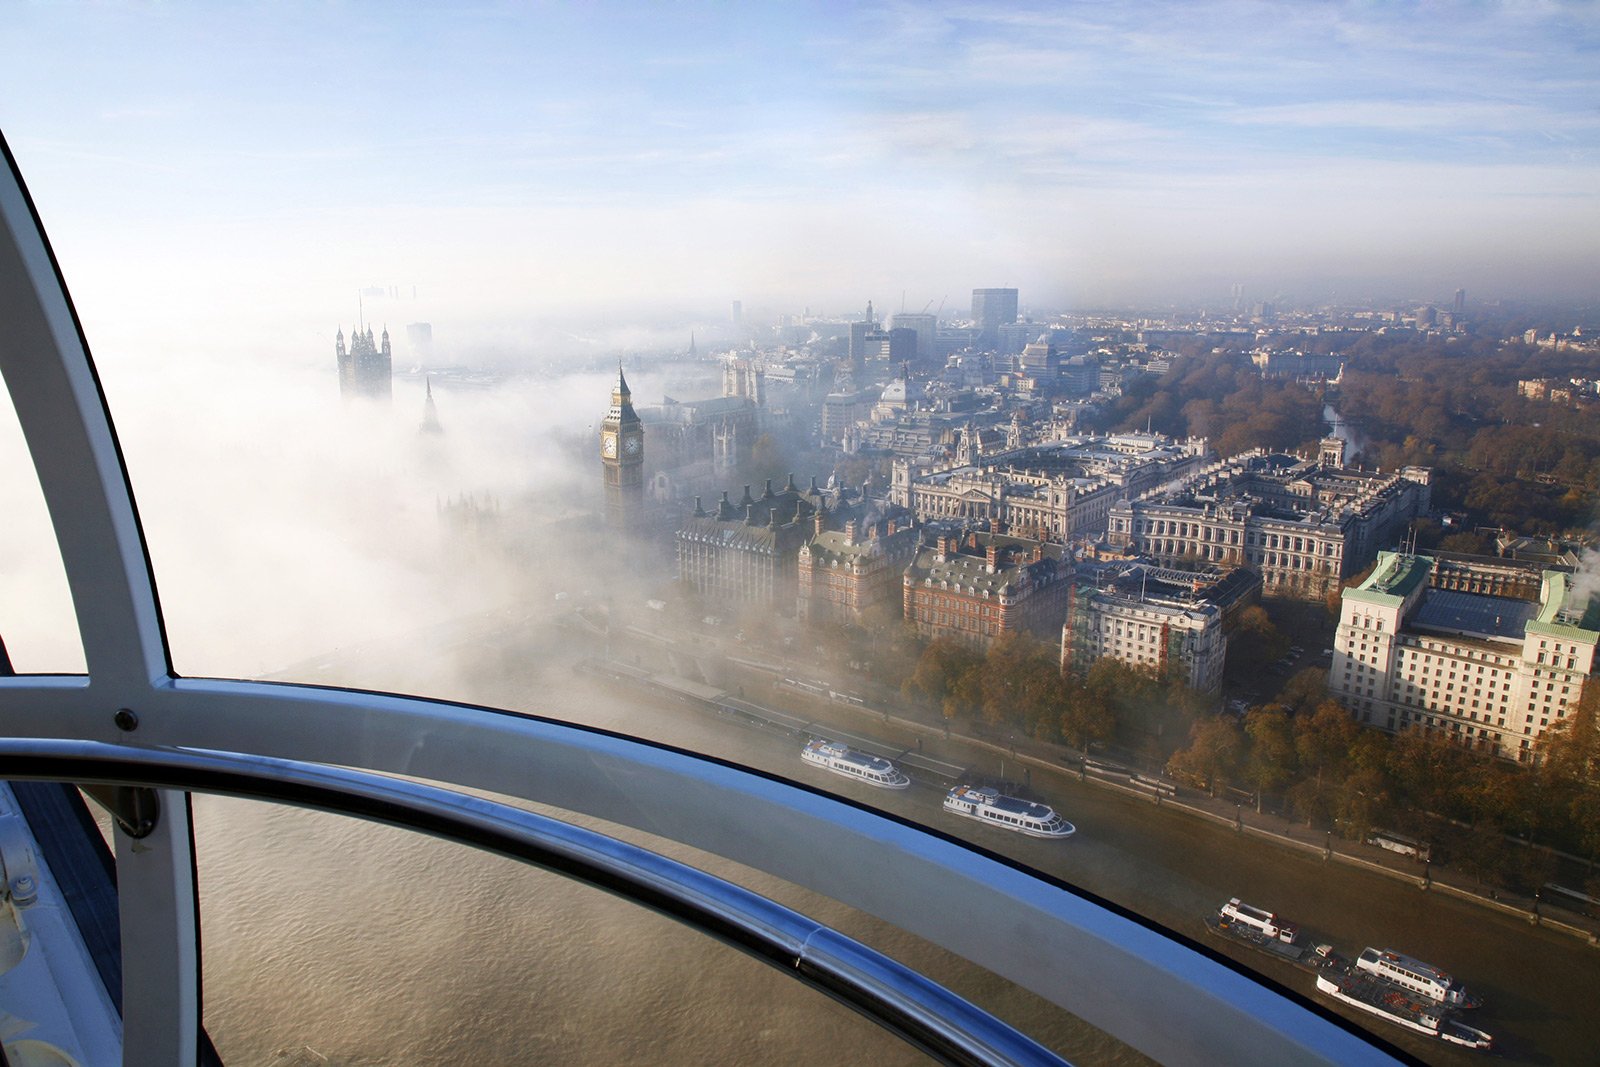 How to take a ride on the London Eye in London